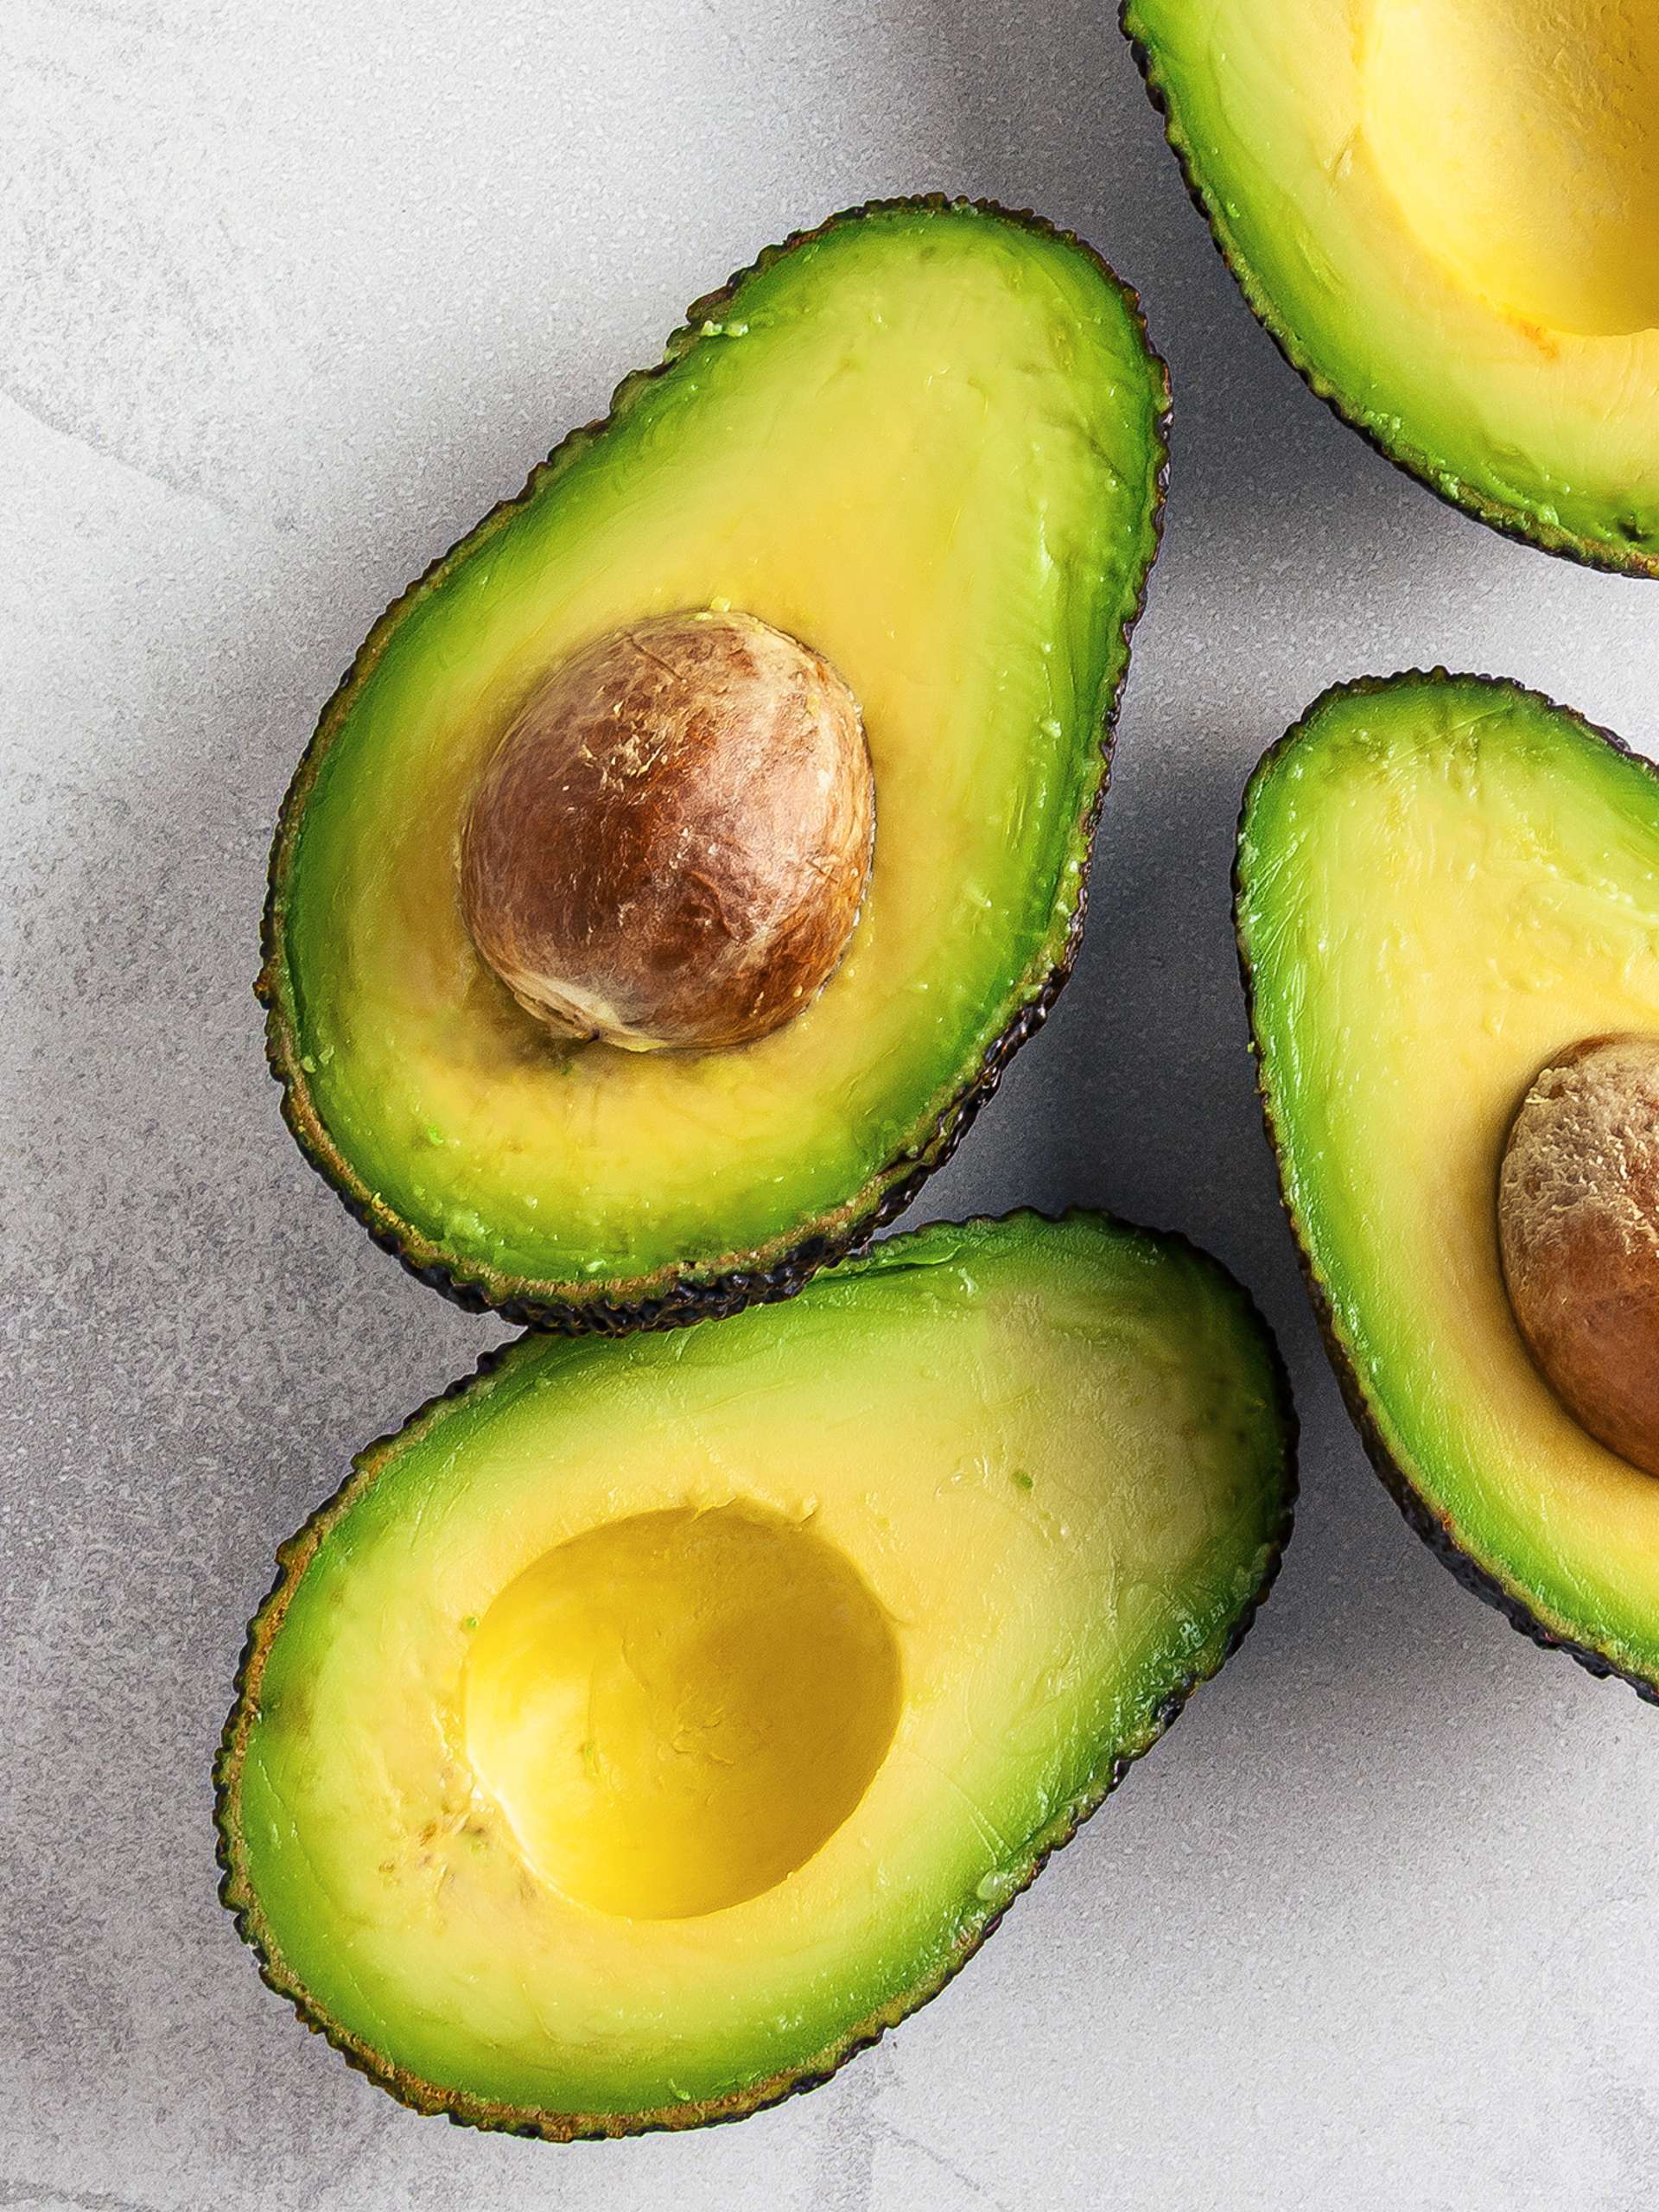 9 Healthy Ways to Add Avocado to Your Diet